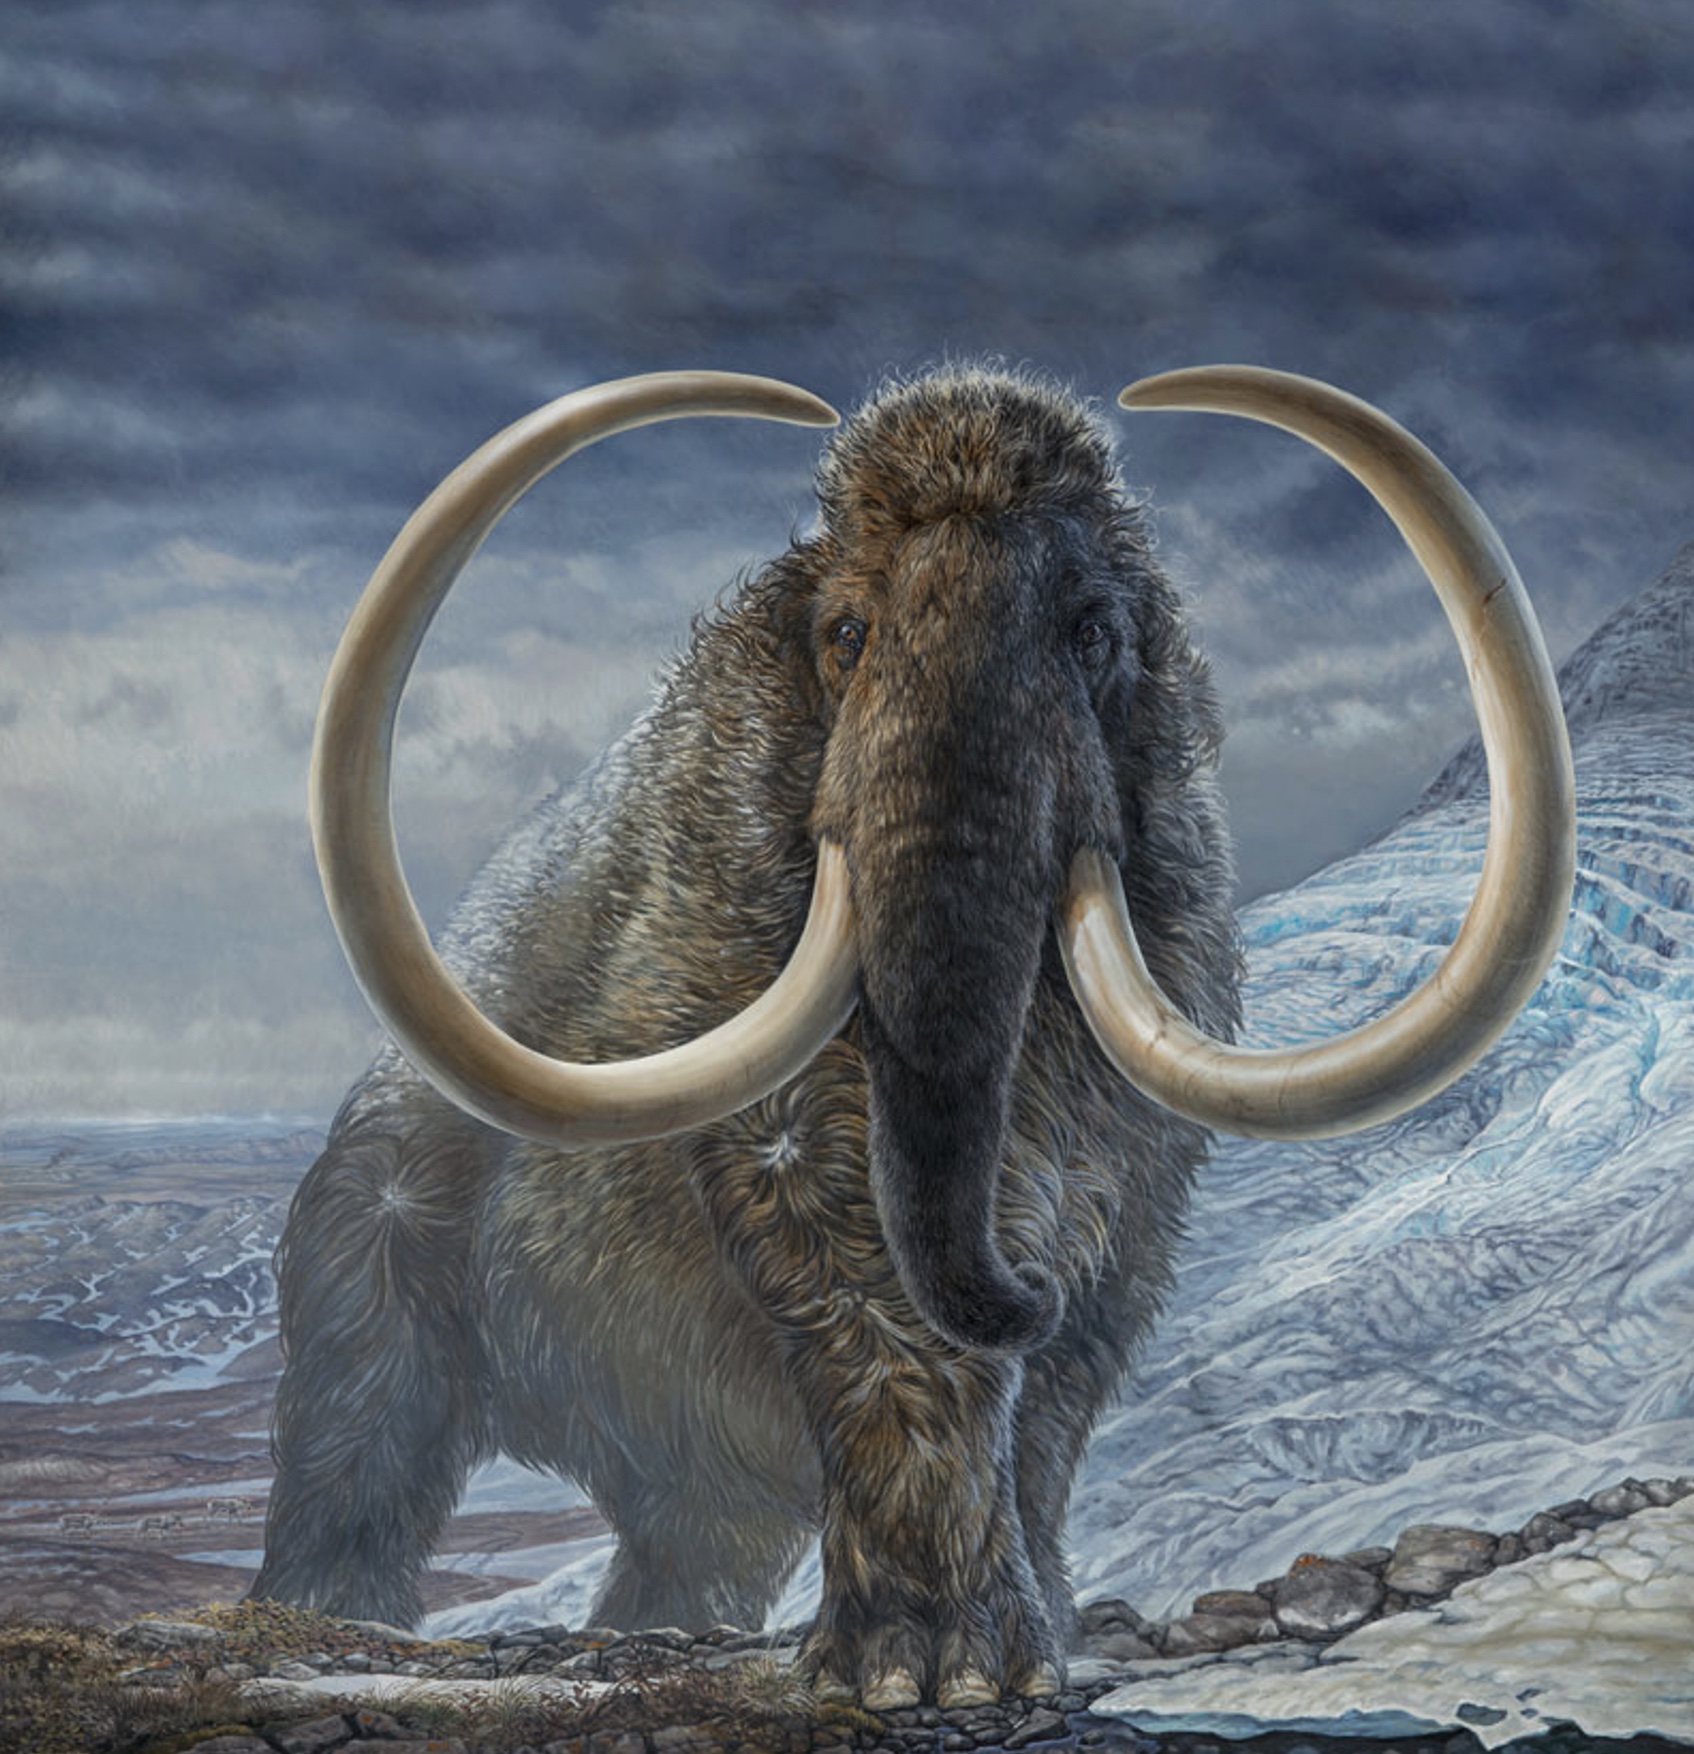 A painting shows a mammoth walking on landscape of tundra, rock, snow and glaciers.